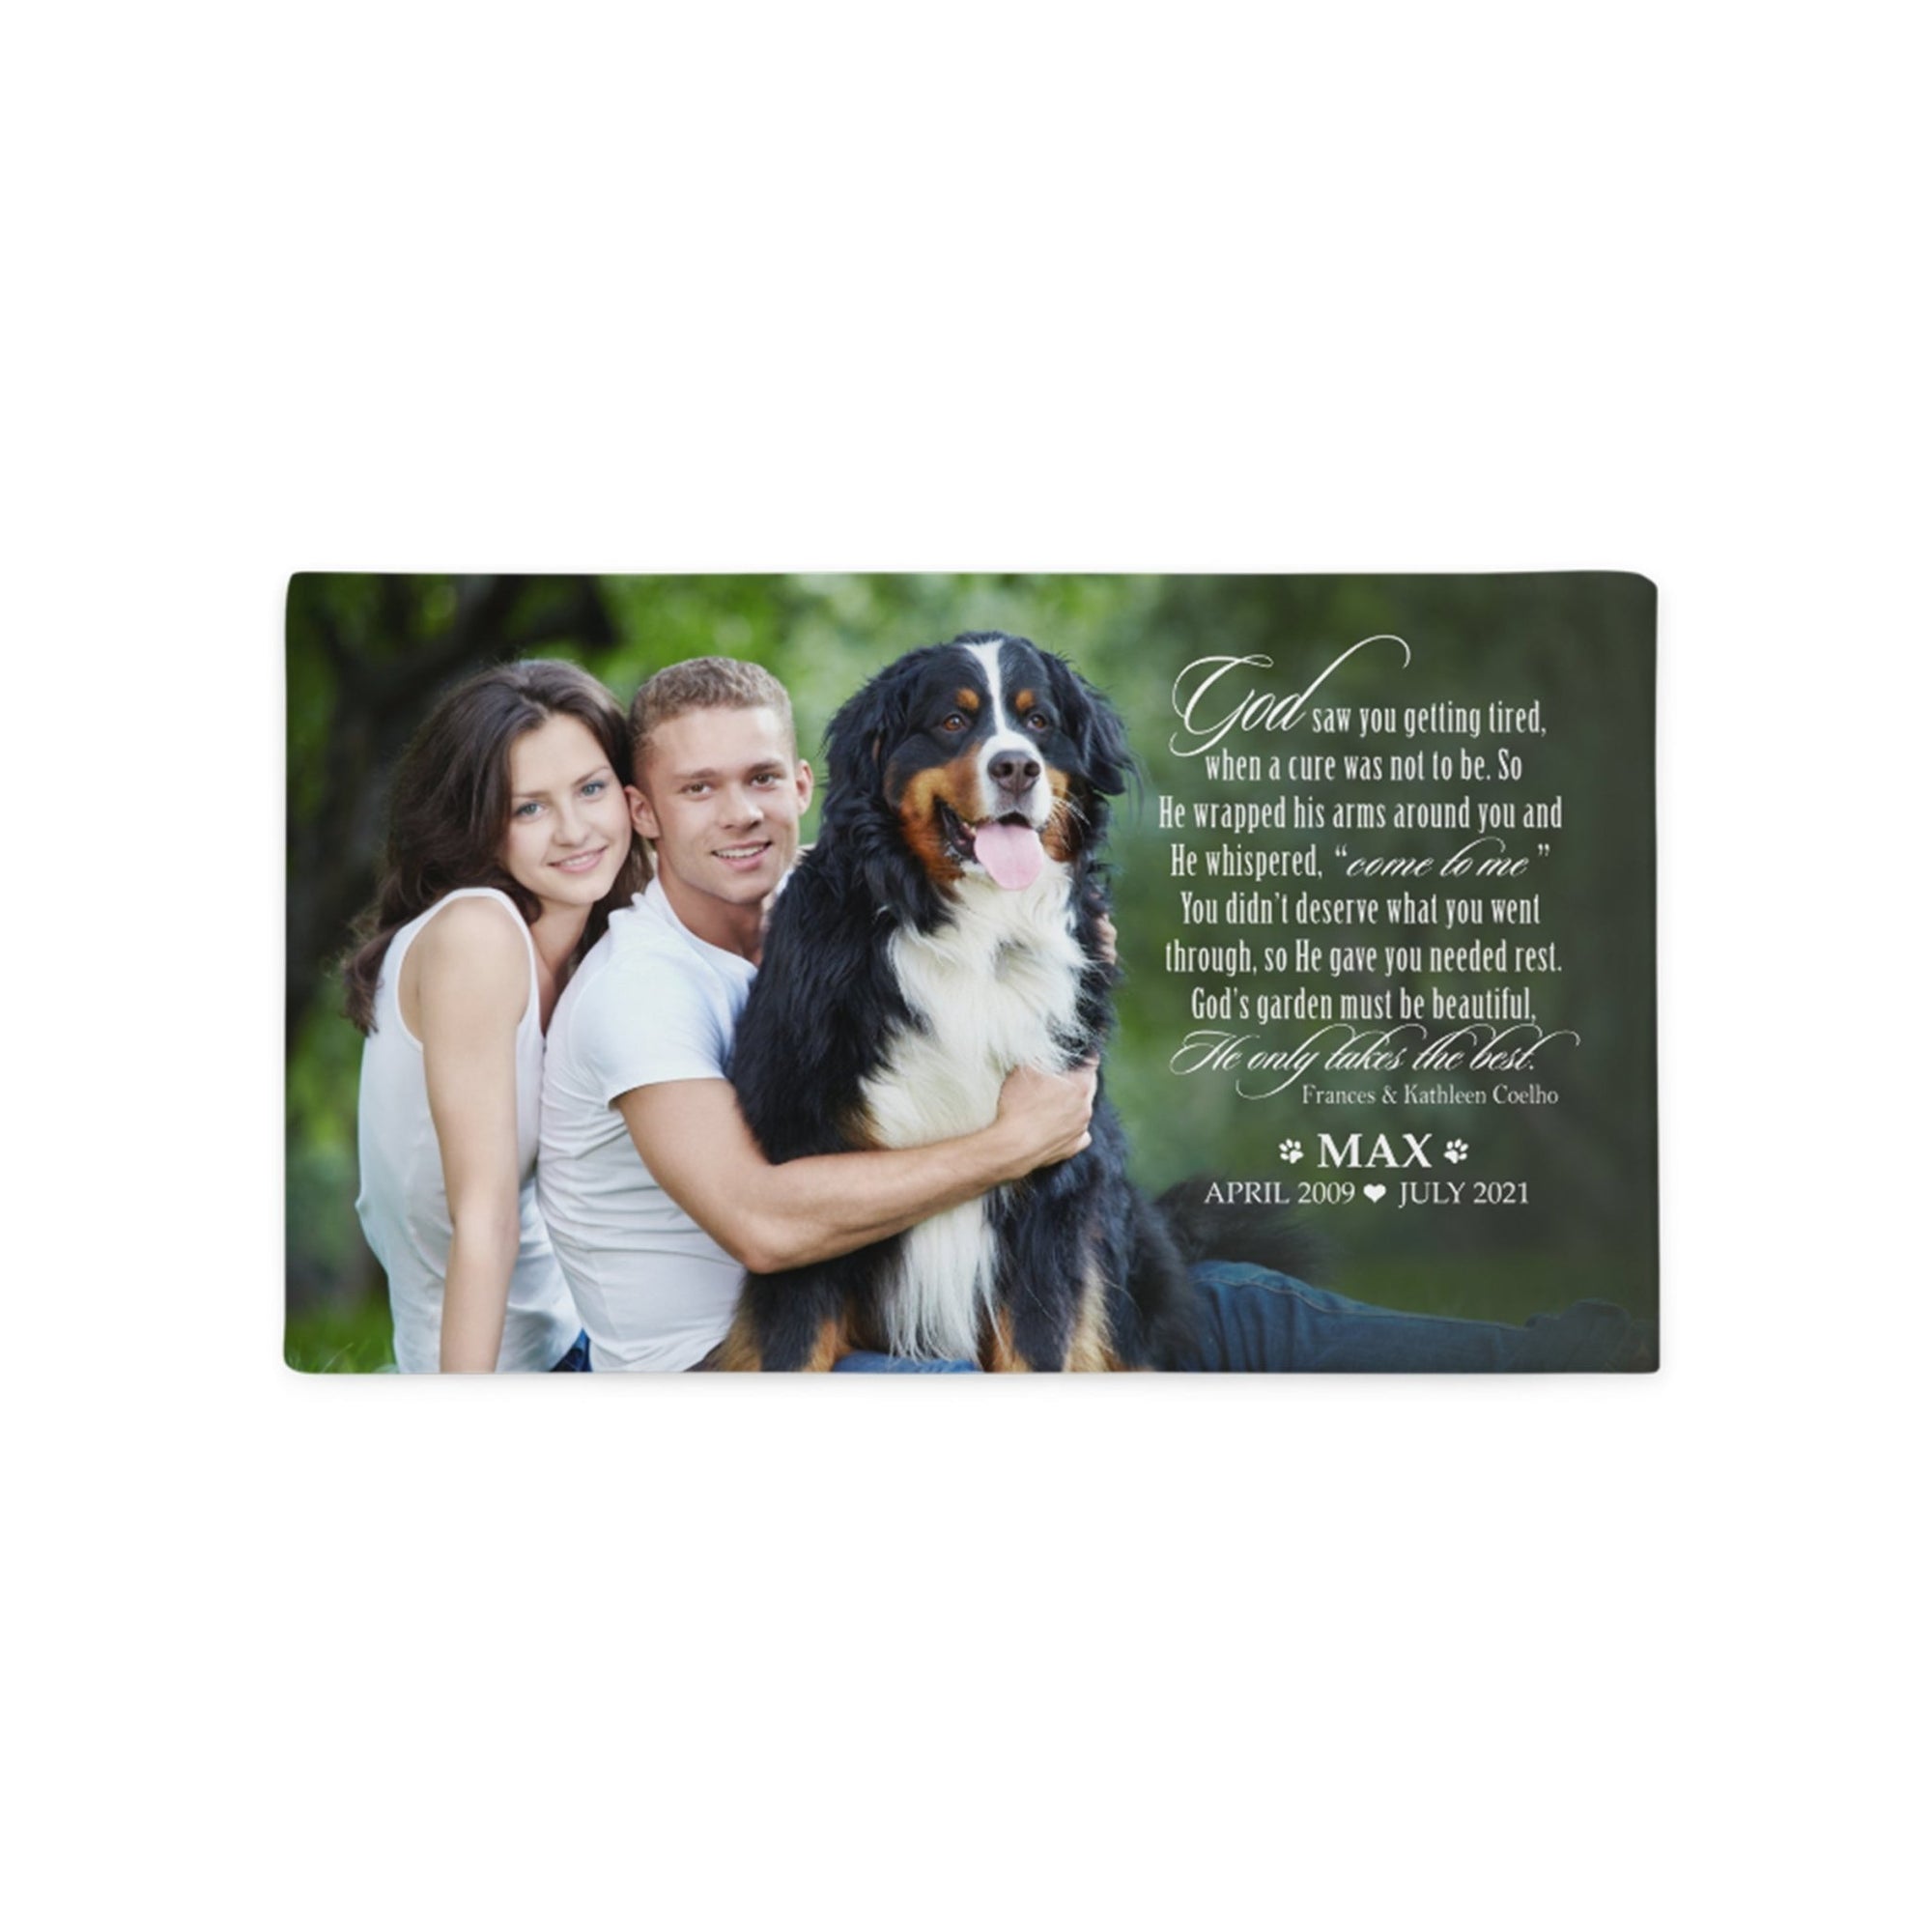 Personalized Pet Memorial Printed Throw Pillow Case - God Saw You Getting Tired - LifeSong Milestones